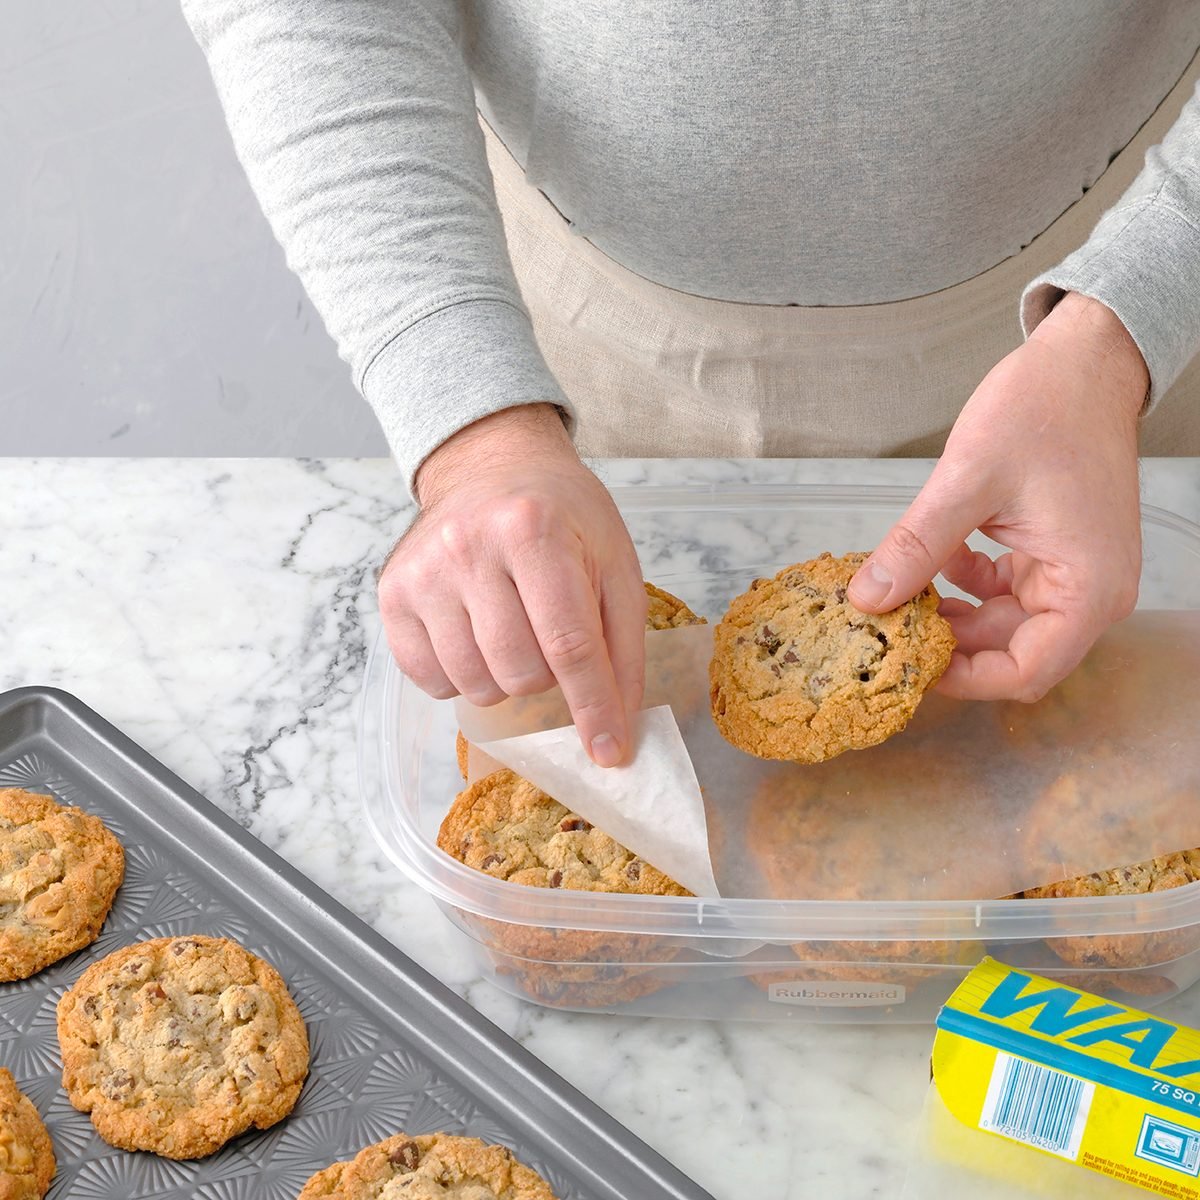 A person layering homemade cookies on parchment paper to store them in an airtight container.